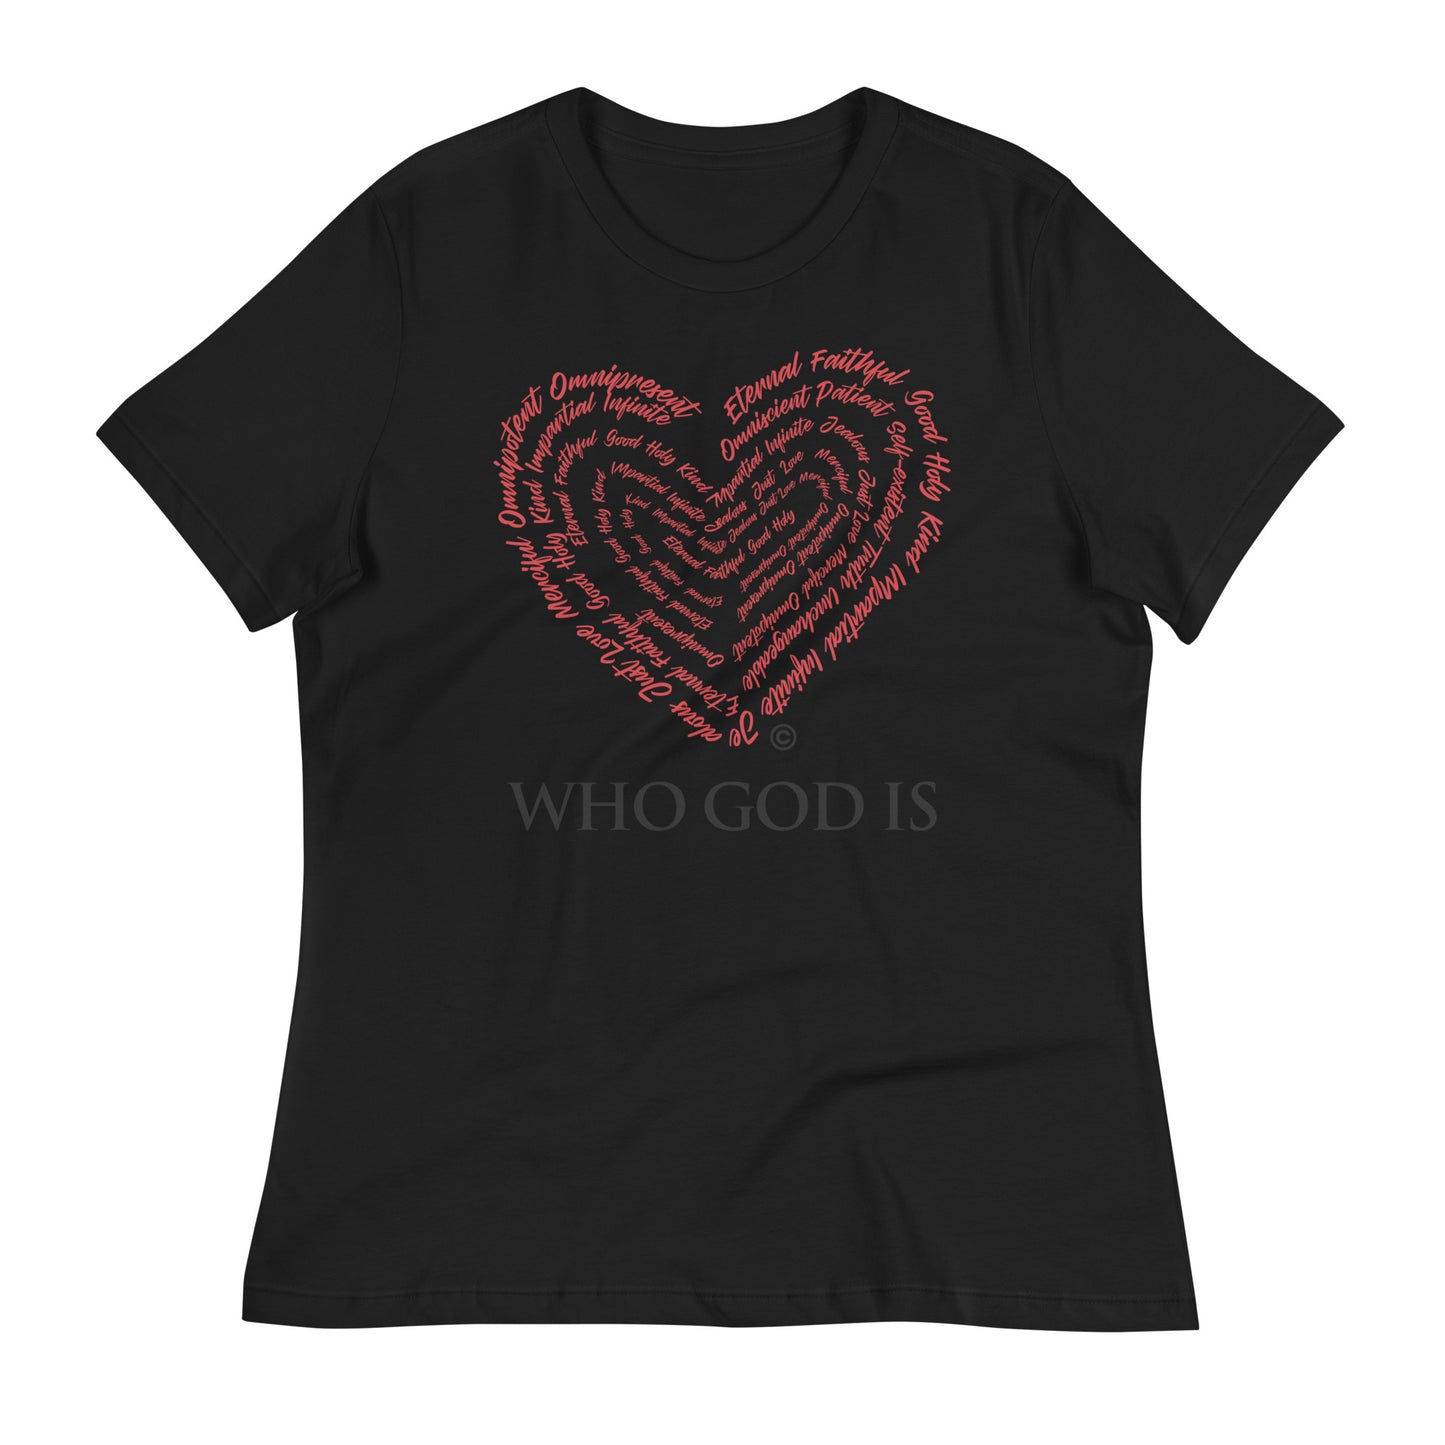 Who God Is Dark-Colored Women's Relaxed T-Shirt